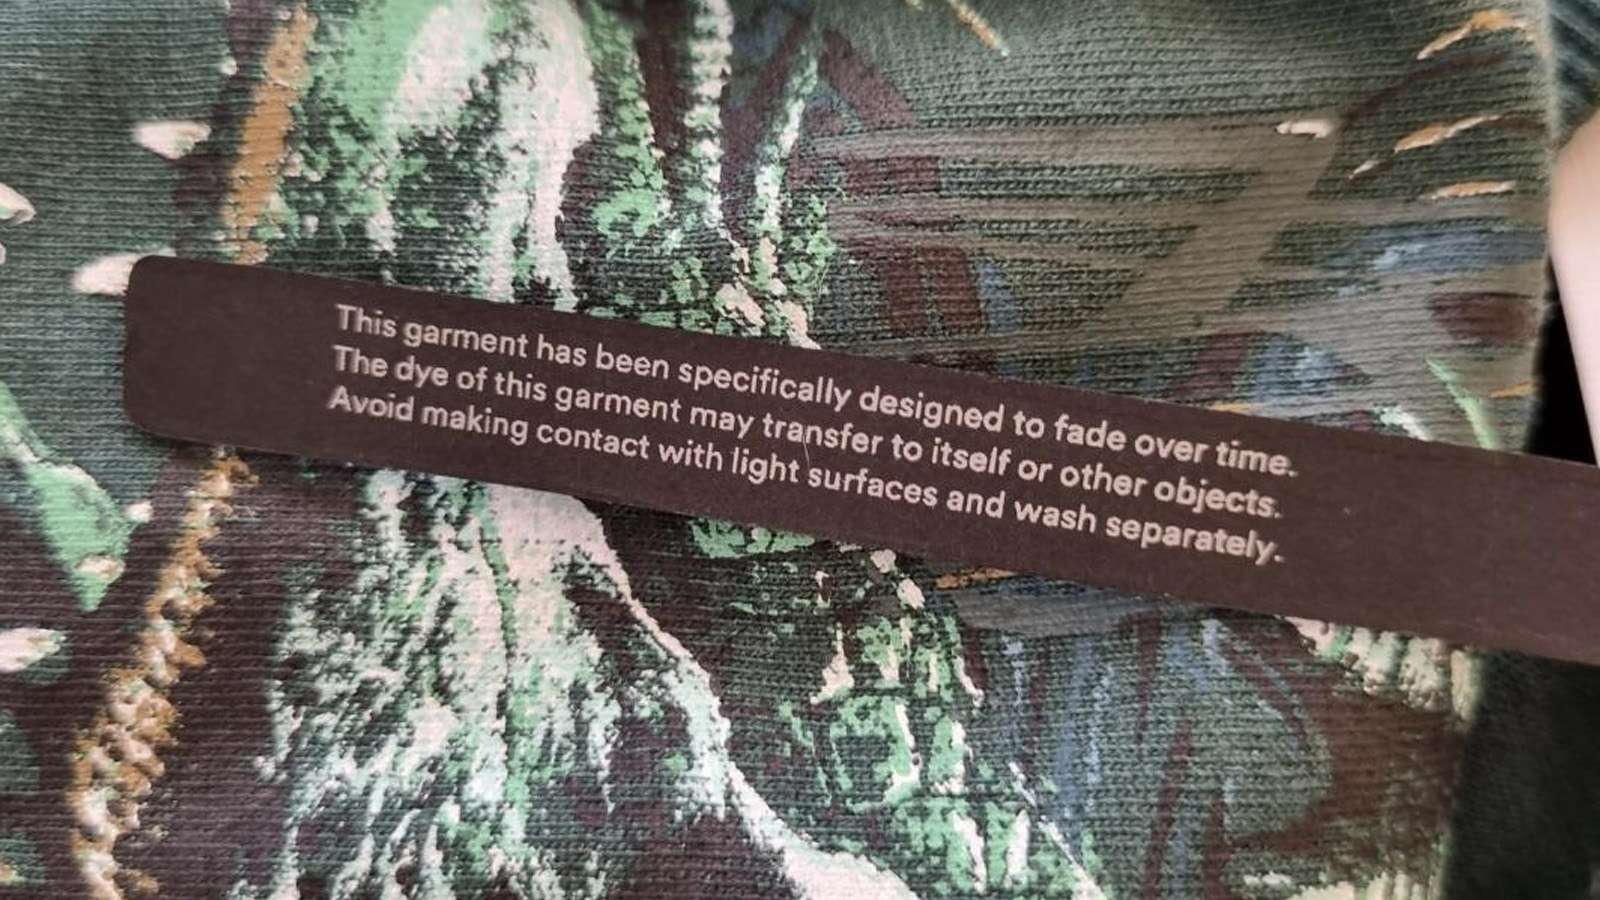 Shoppers furious after discovering clothes that are designed to fade